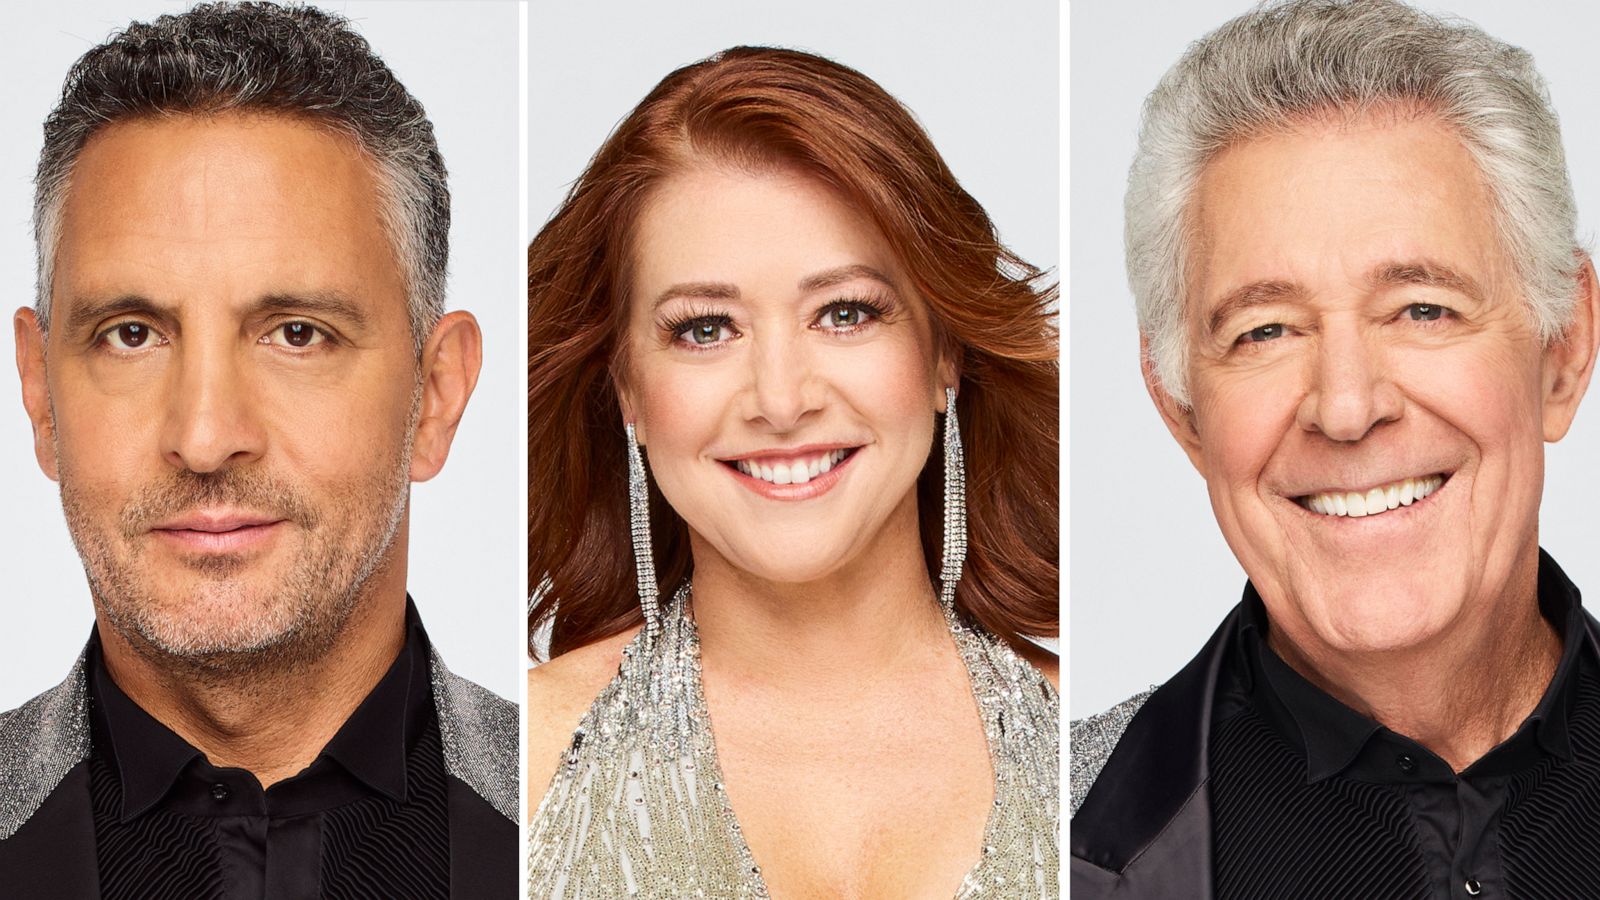 Dancing With the Stars 2022 line-up: Full list of celebrities